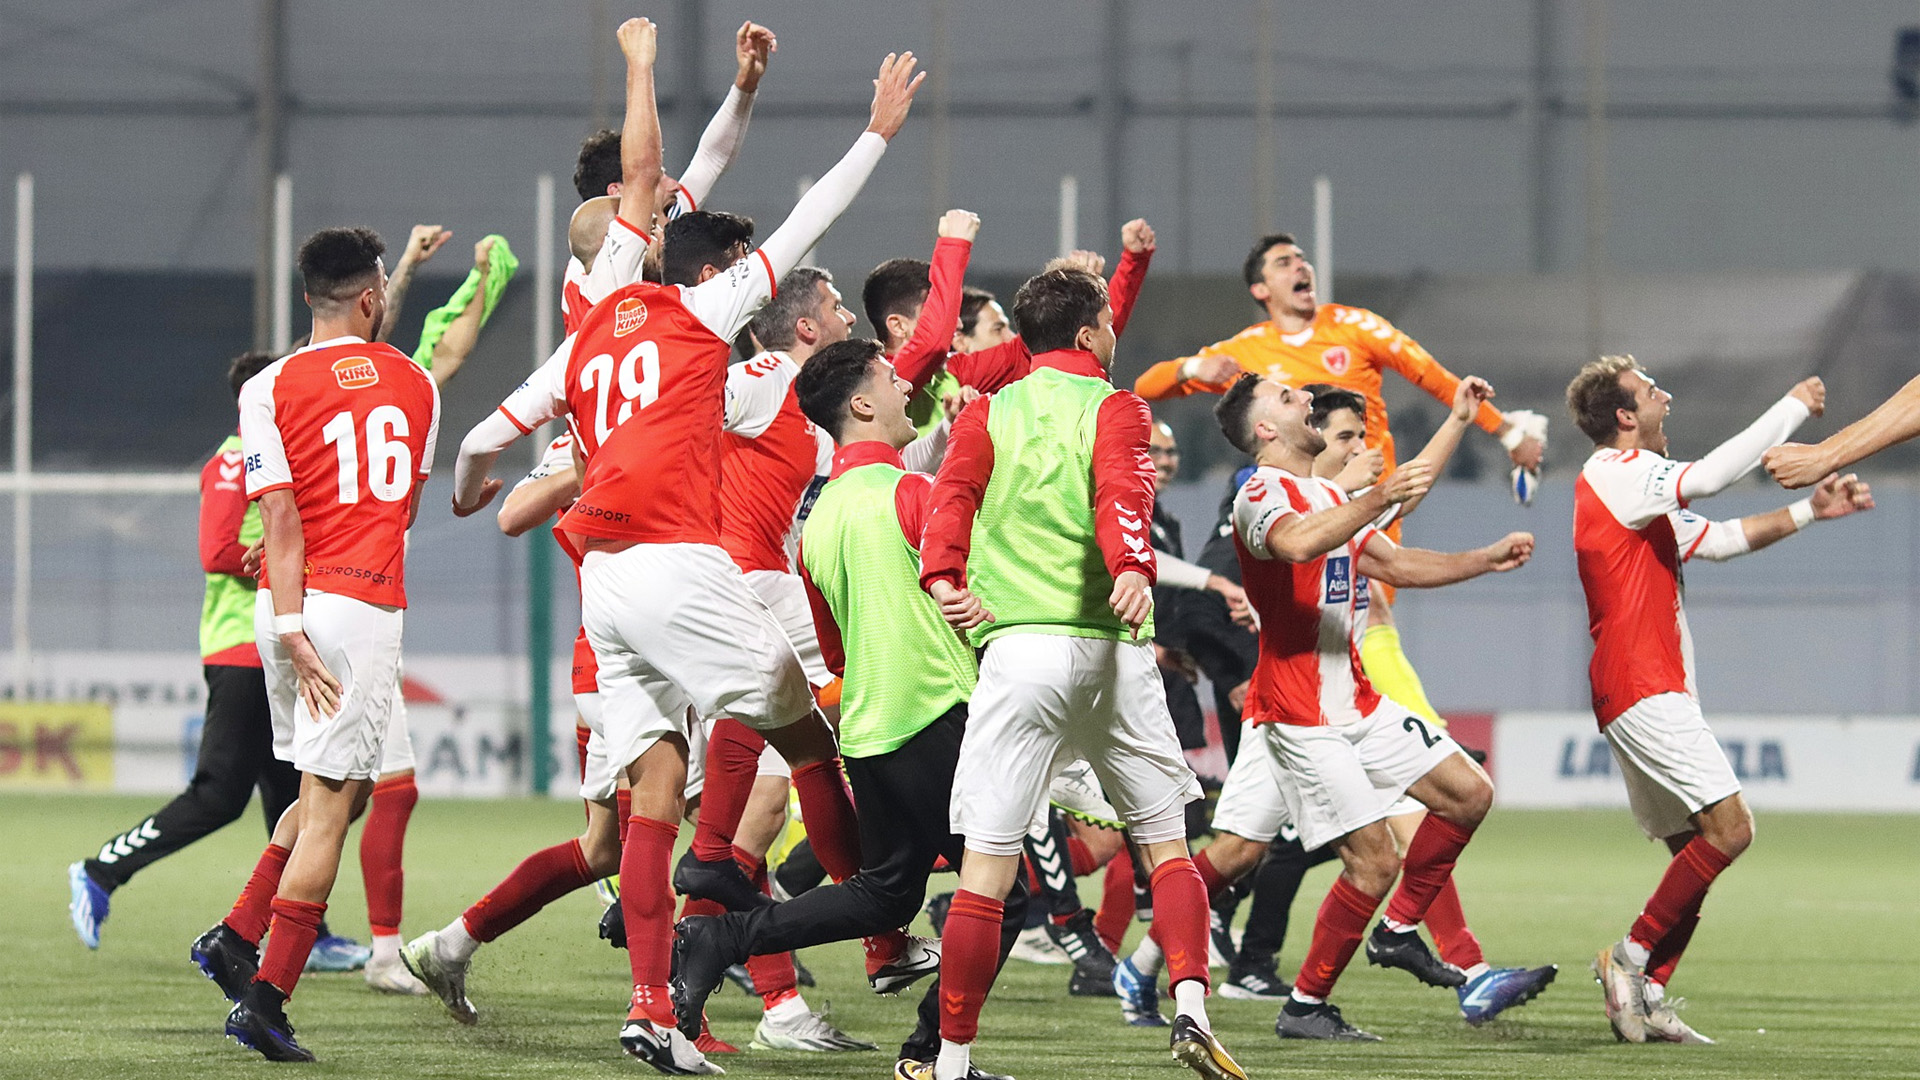 Melita Nears Challenge League Title with Victory Over Zabbar